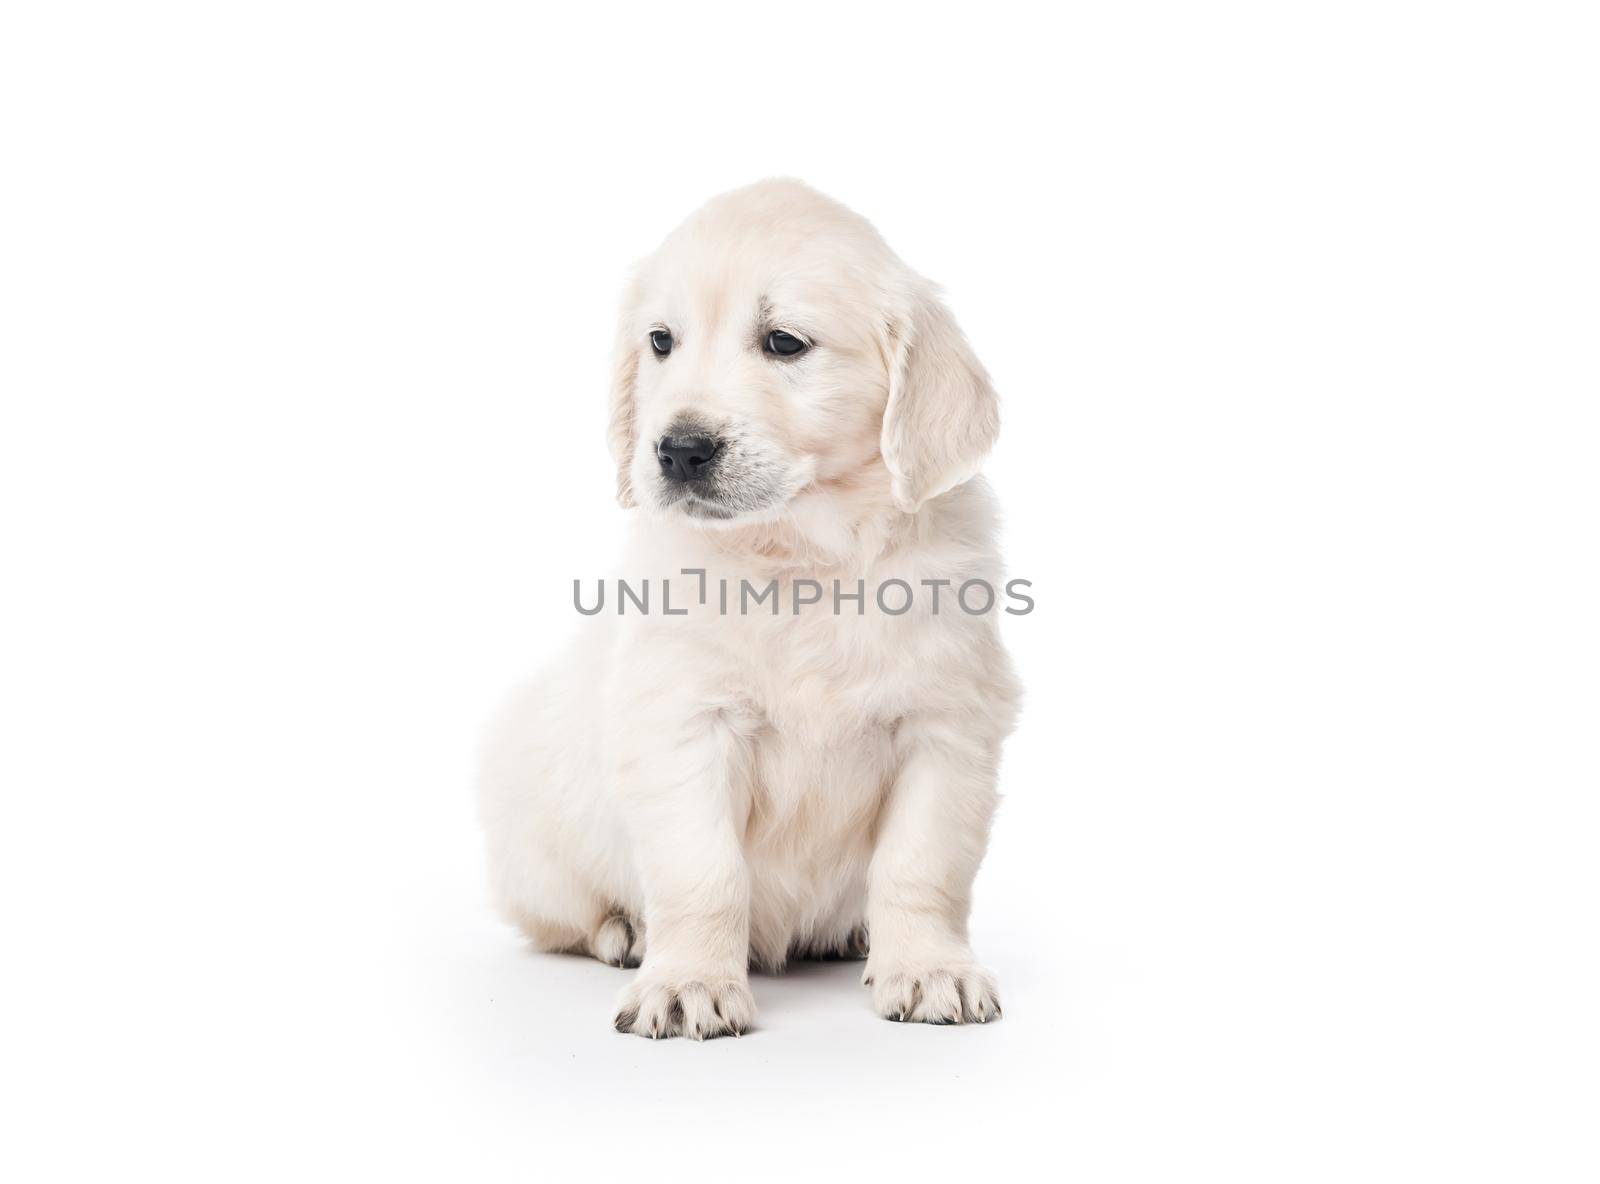 Cute little golden retriever puppy sitting isolated on white background